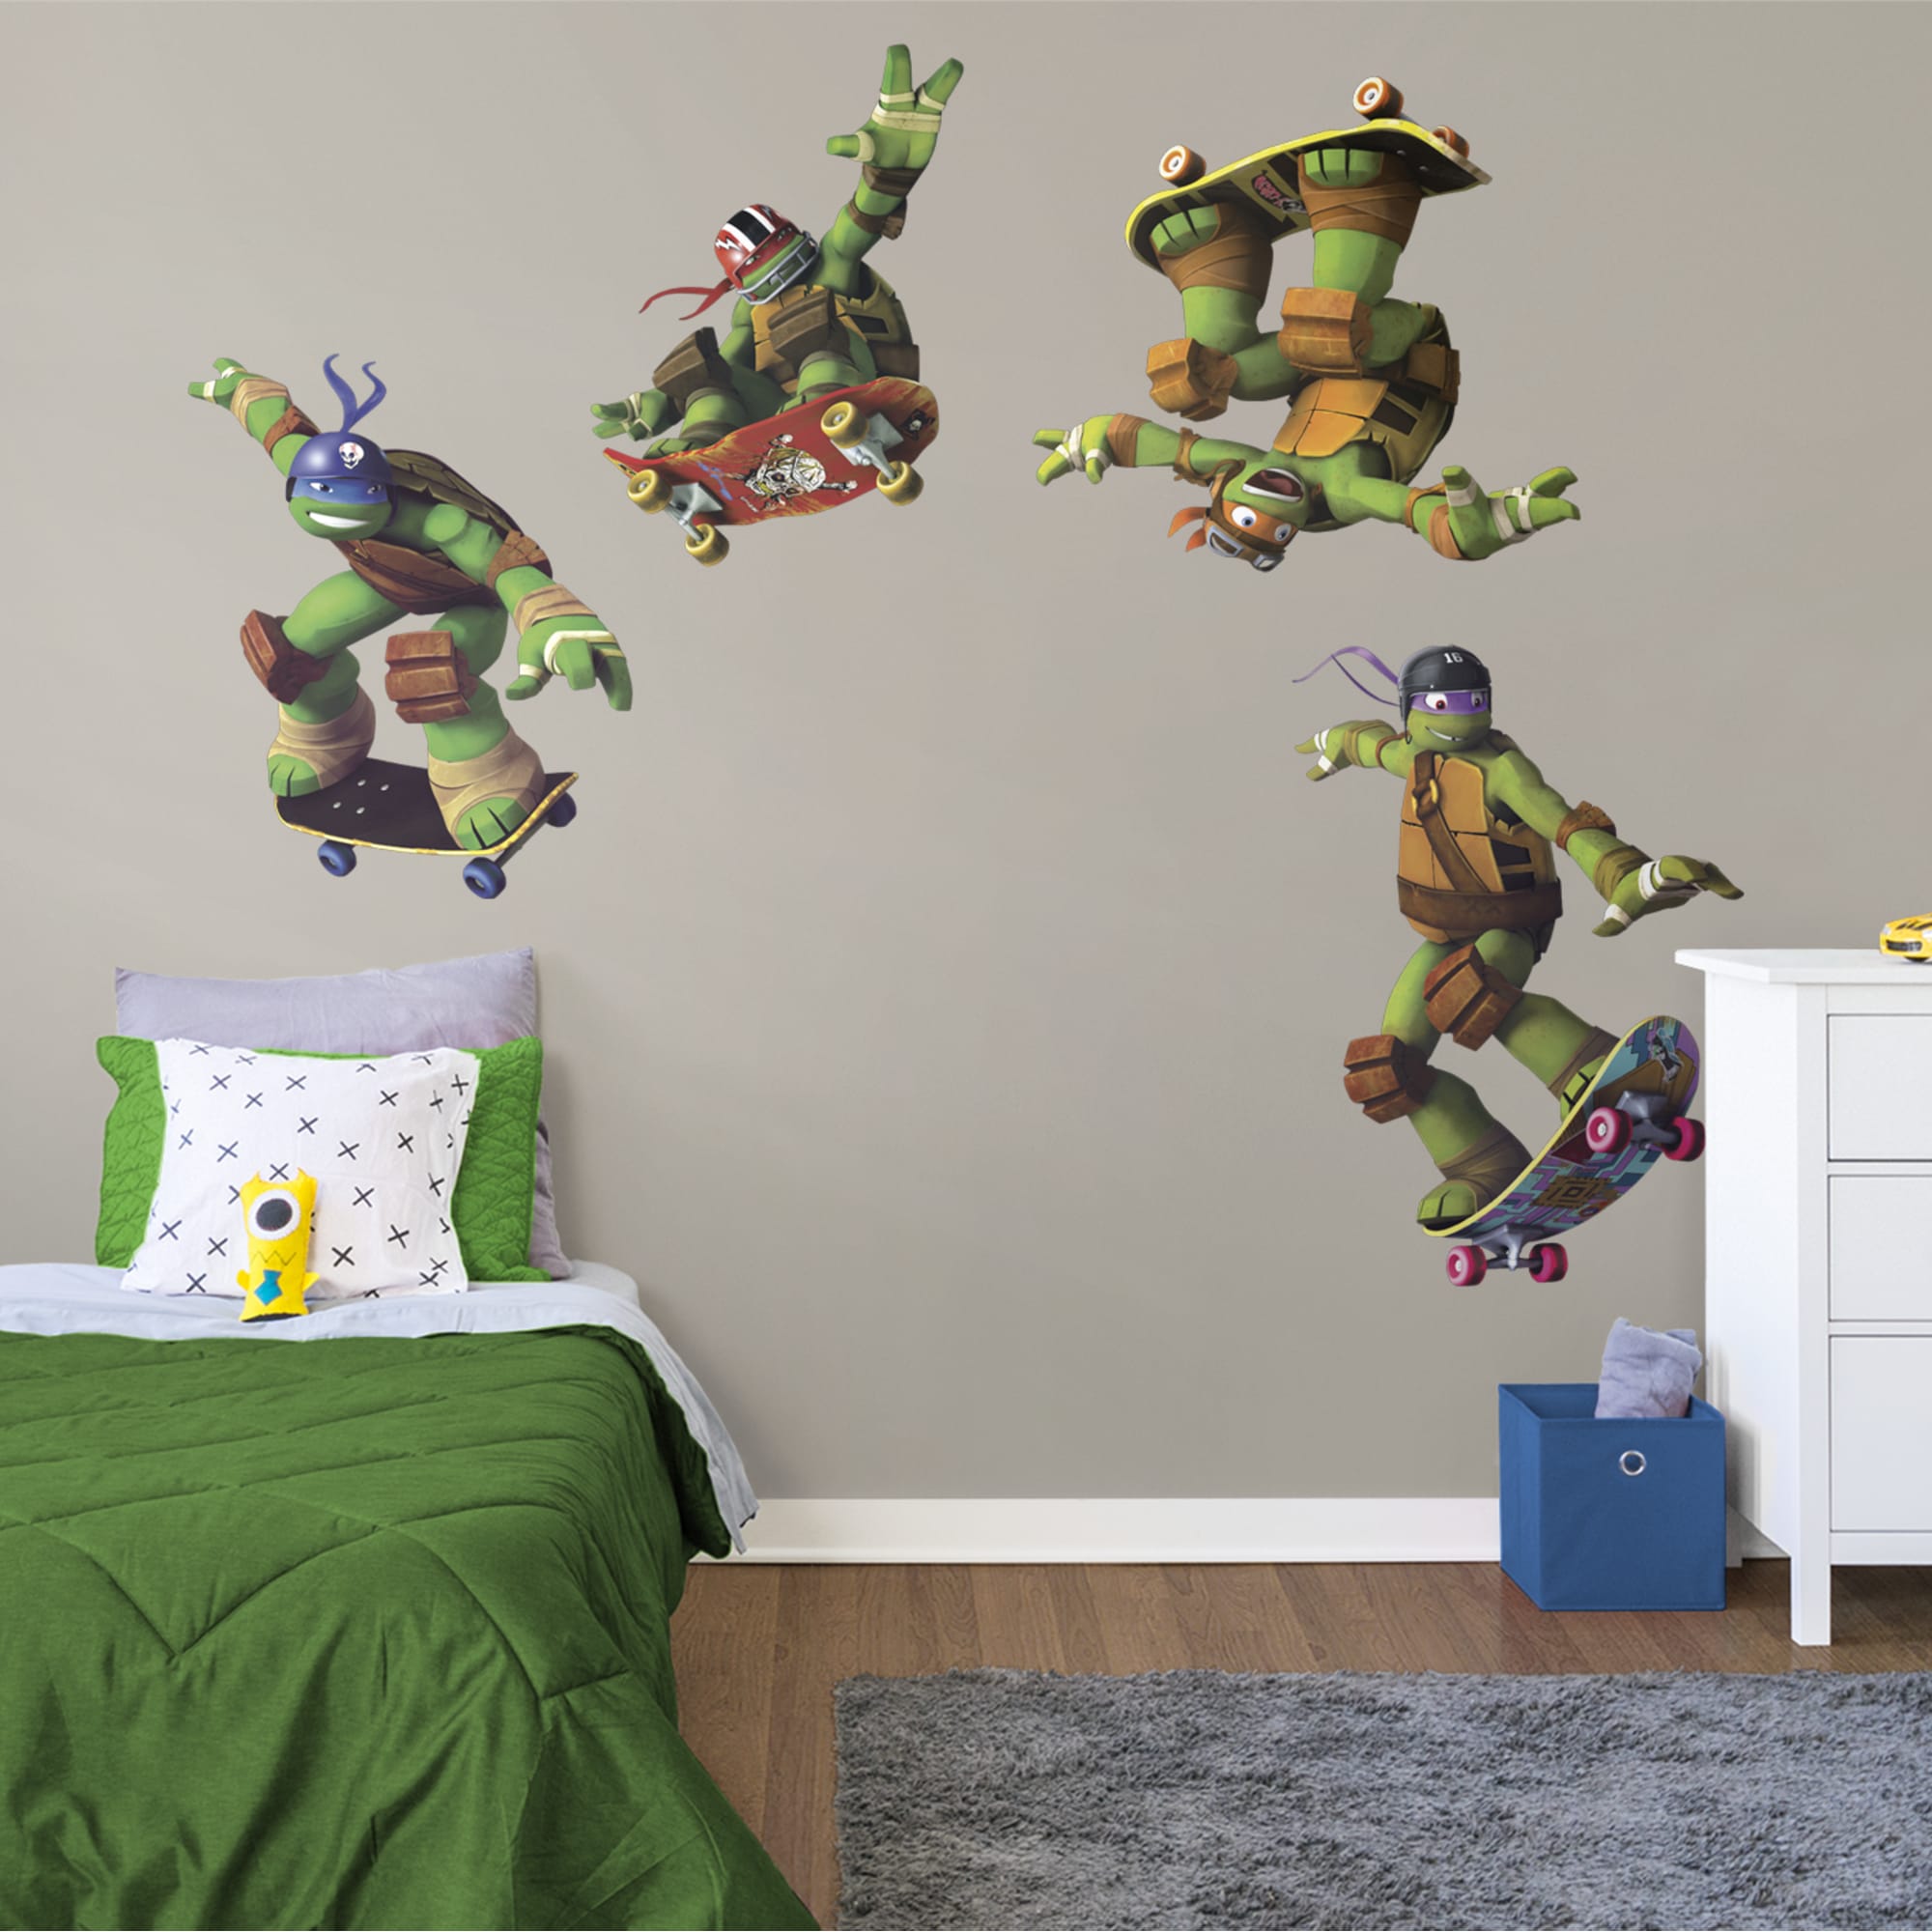 Teenage Mutant Ninja Turtles: Skateboarding Collection - Officially Licensed Removable Wall Decal 79.0"W x 53.0"H by Fathead | V